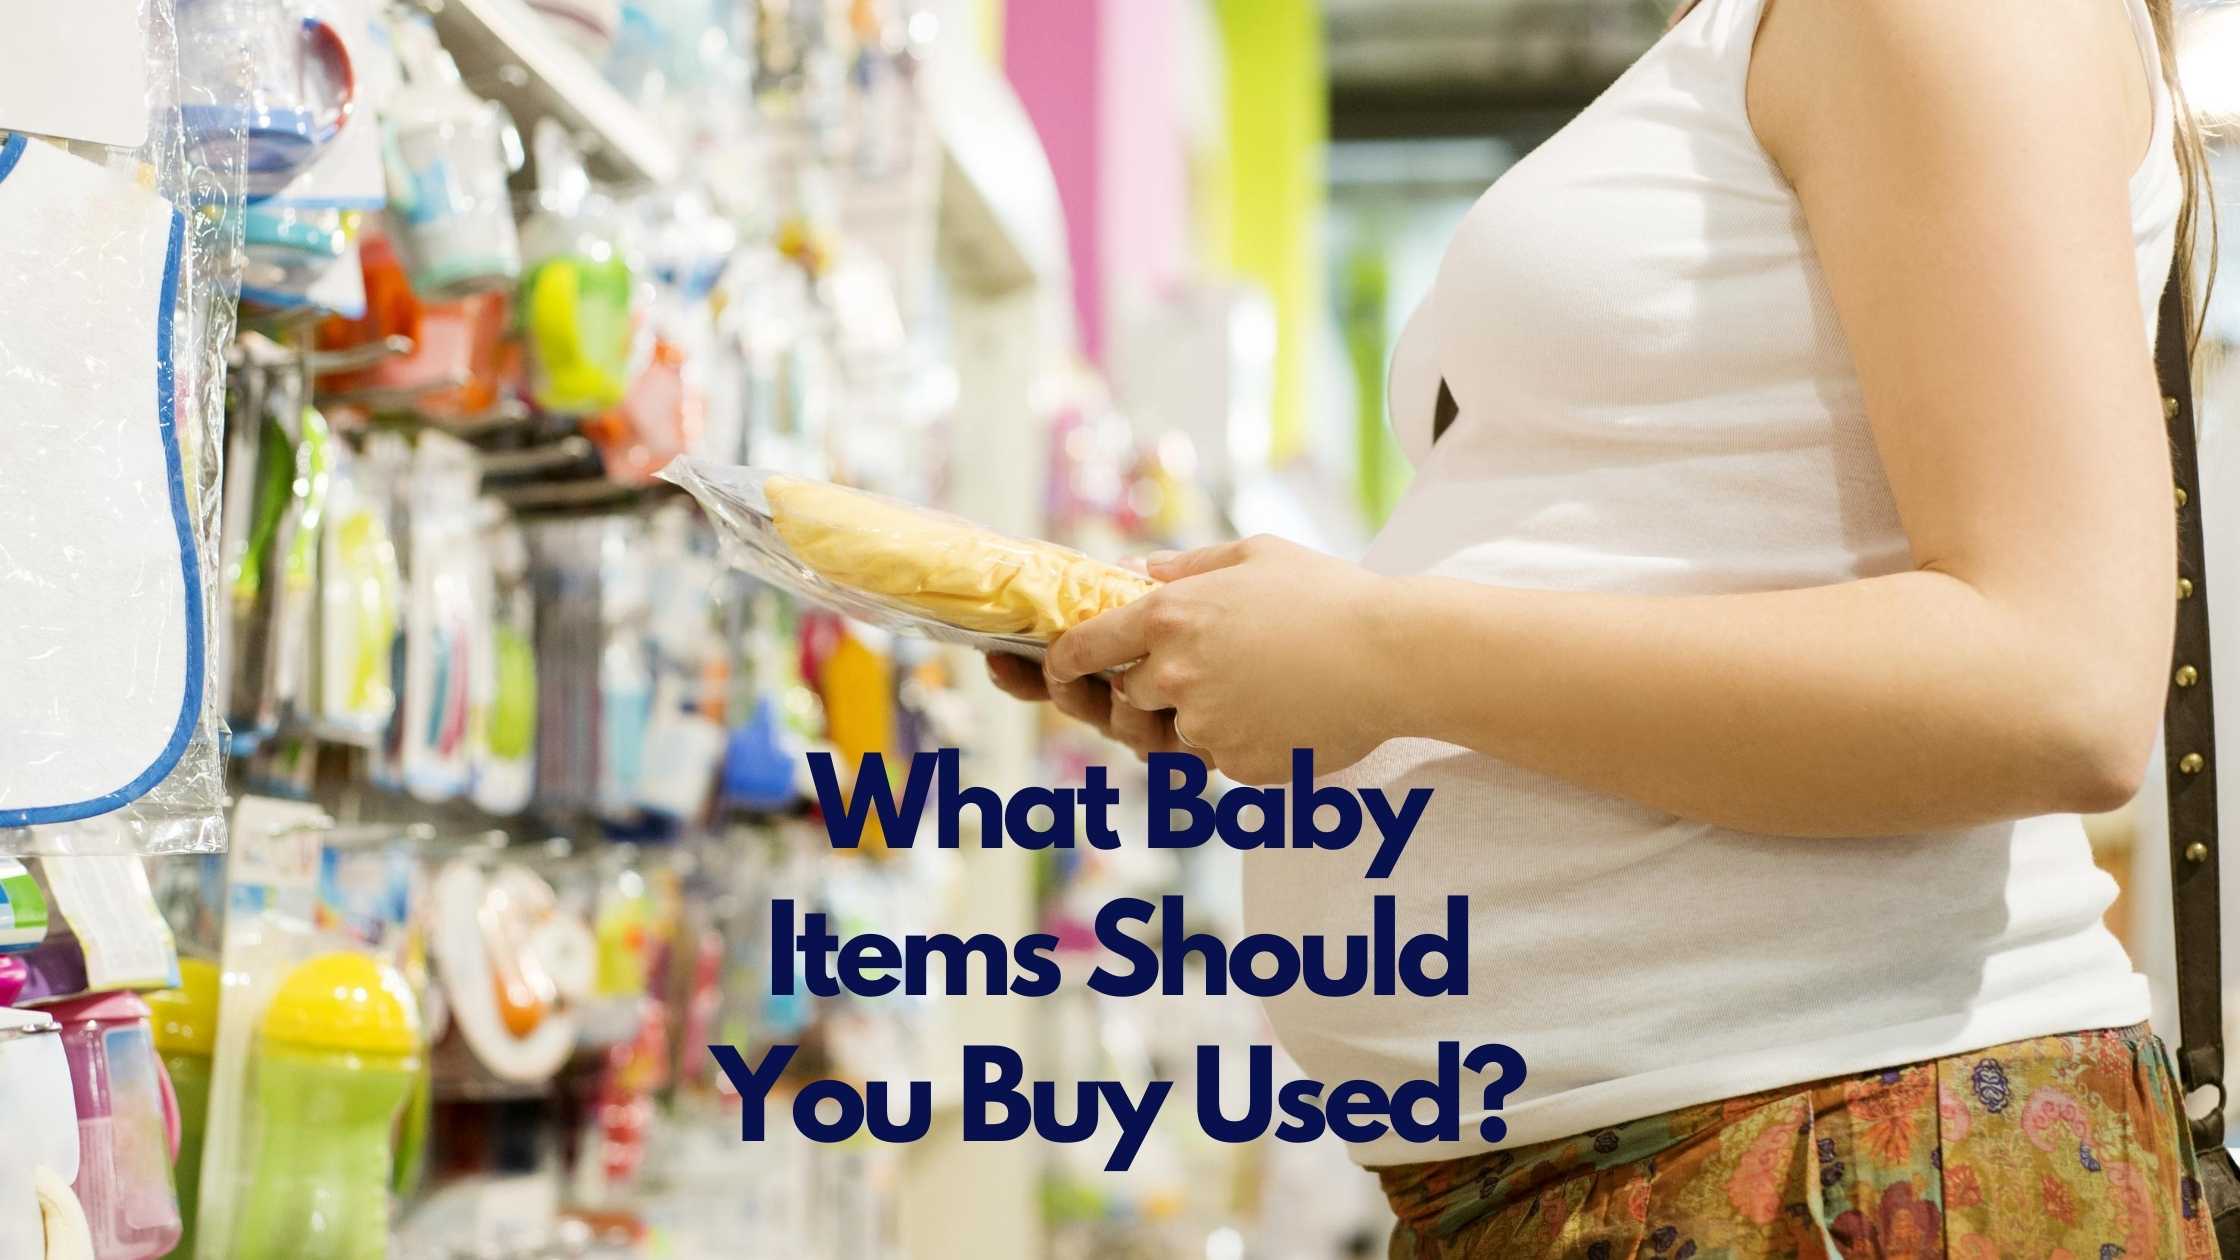 https://www.sheepbuy.com/blog/wp-content/uploads/2020/08/What-baby-items-should-you-buy-used.jpg